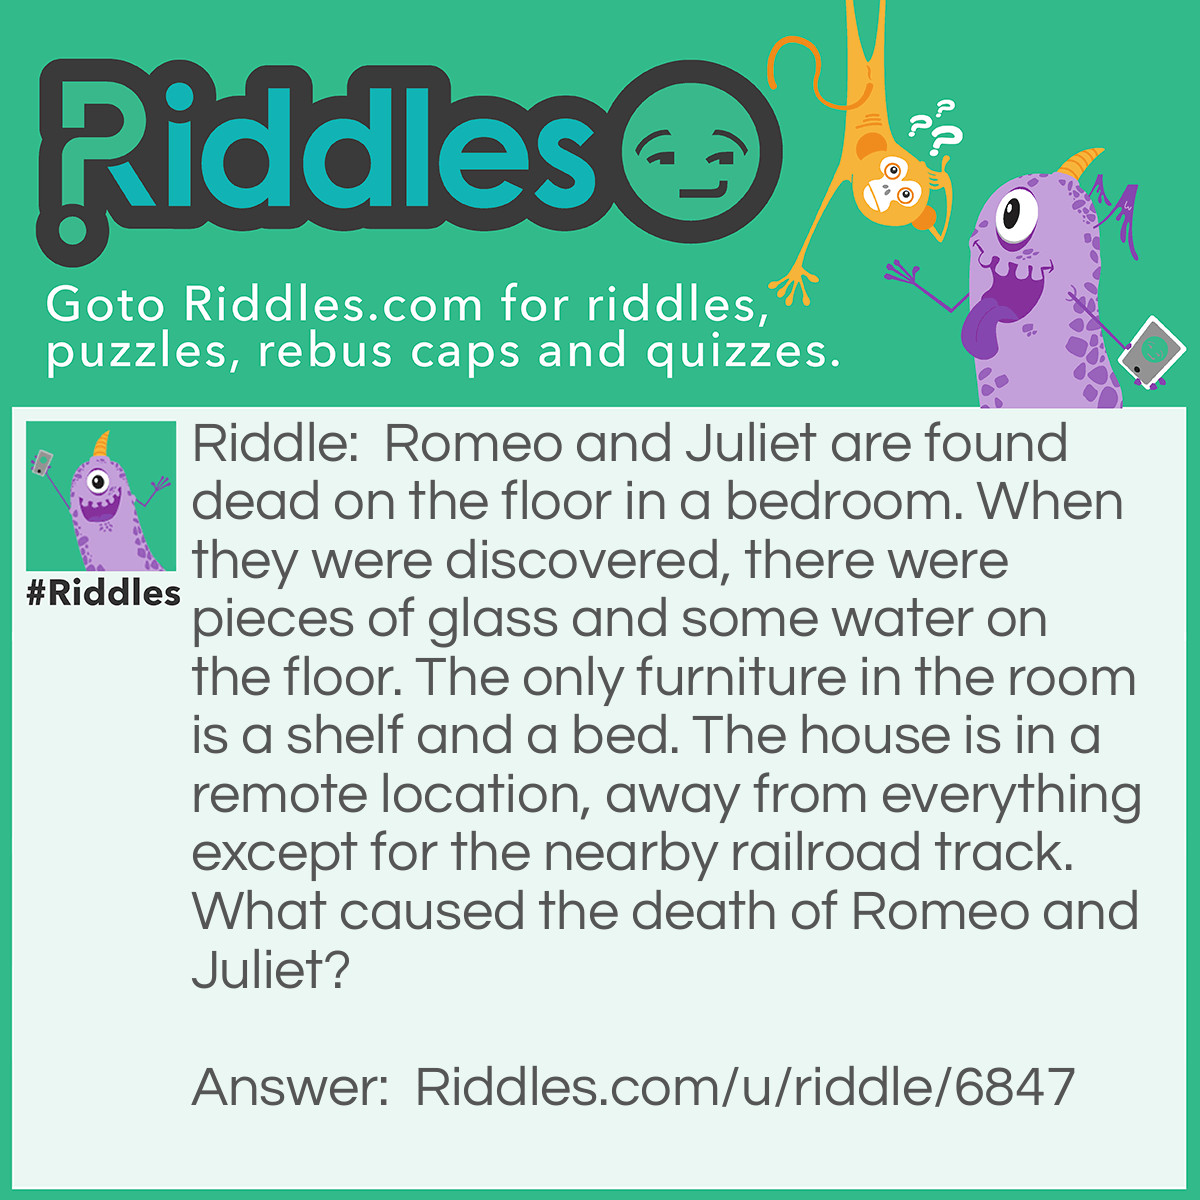 Riddle: Romeo and Juliet are found dead on the floor in a bedroom. When they were discovered, there were pieces of glass and some water on the floor. The only furniture in the room is a shelf and a bed. The house is in a remote location, away from everything except for the nearby railroad track. What caused the death of Romeo and Juliet? Answer: Romeo and Juliet are fish. The rumble of the train knocked the tank off the shelf, it broke and Romeo and Juliet did not survive.